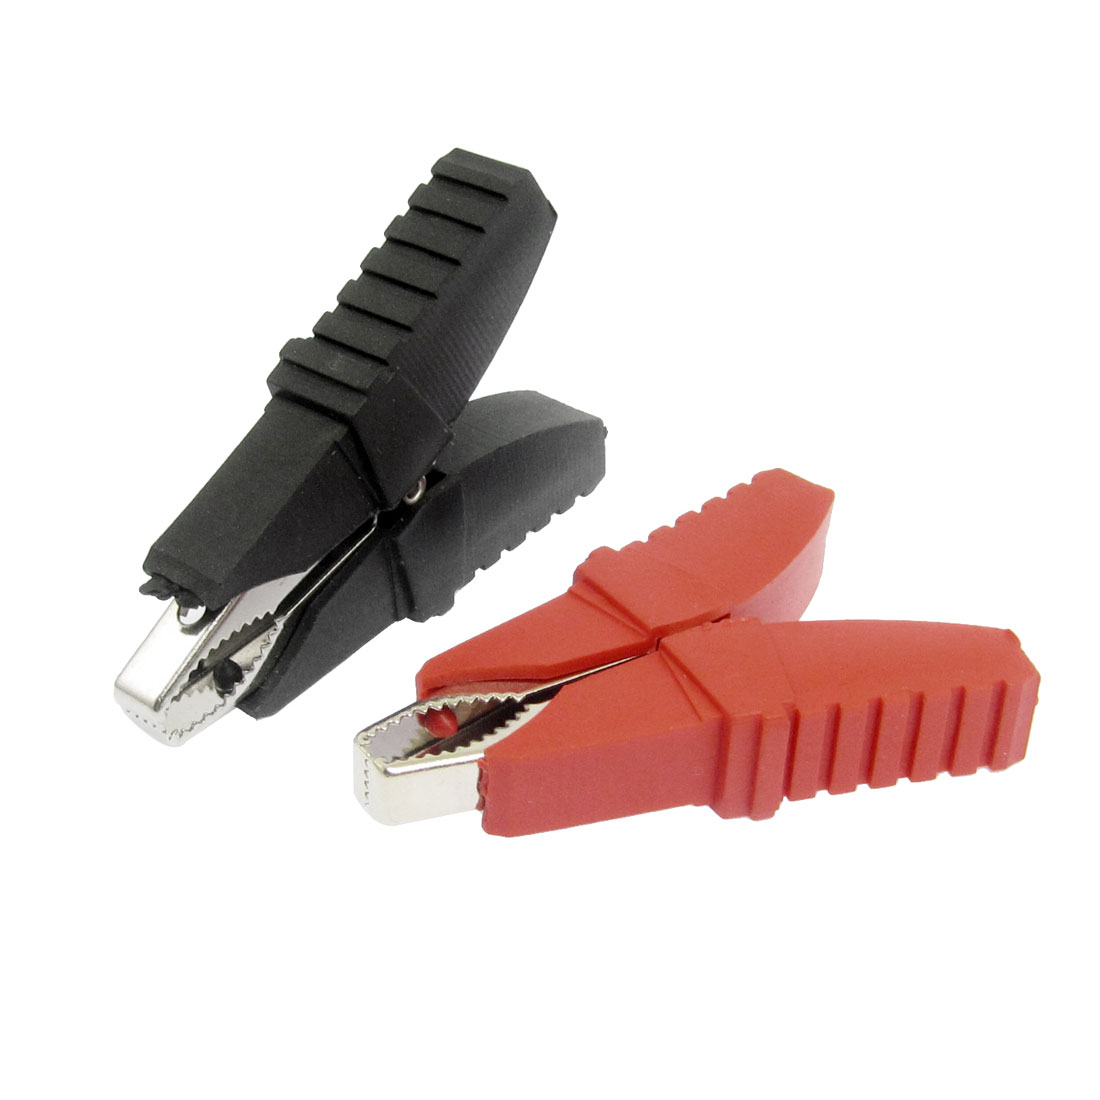 Unique Bargains 2 Pieces Black Red Sleeve 100A Battery Test Clips Alligator Clamps for Car